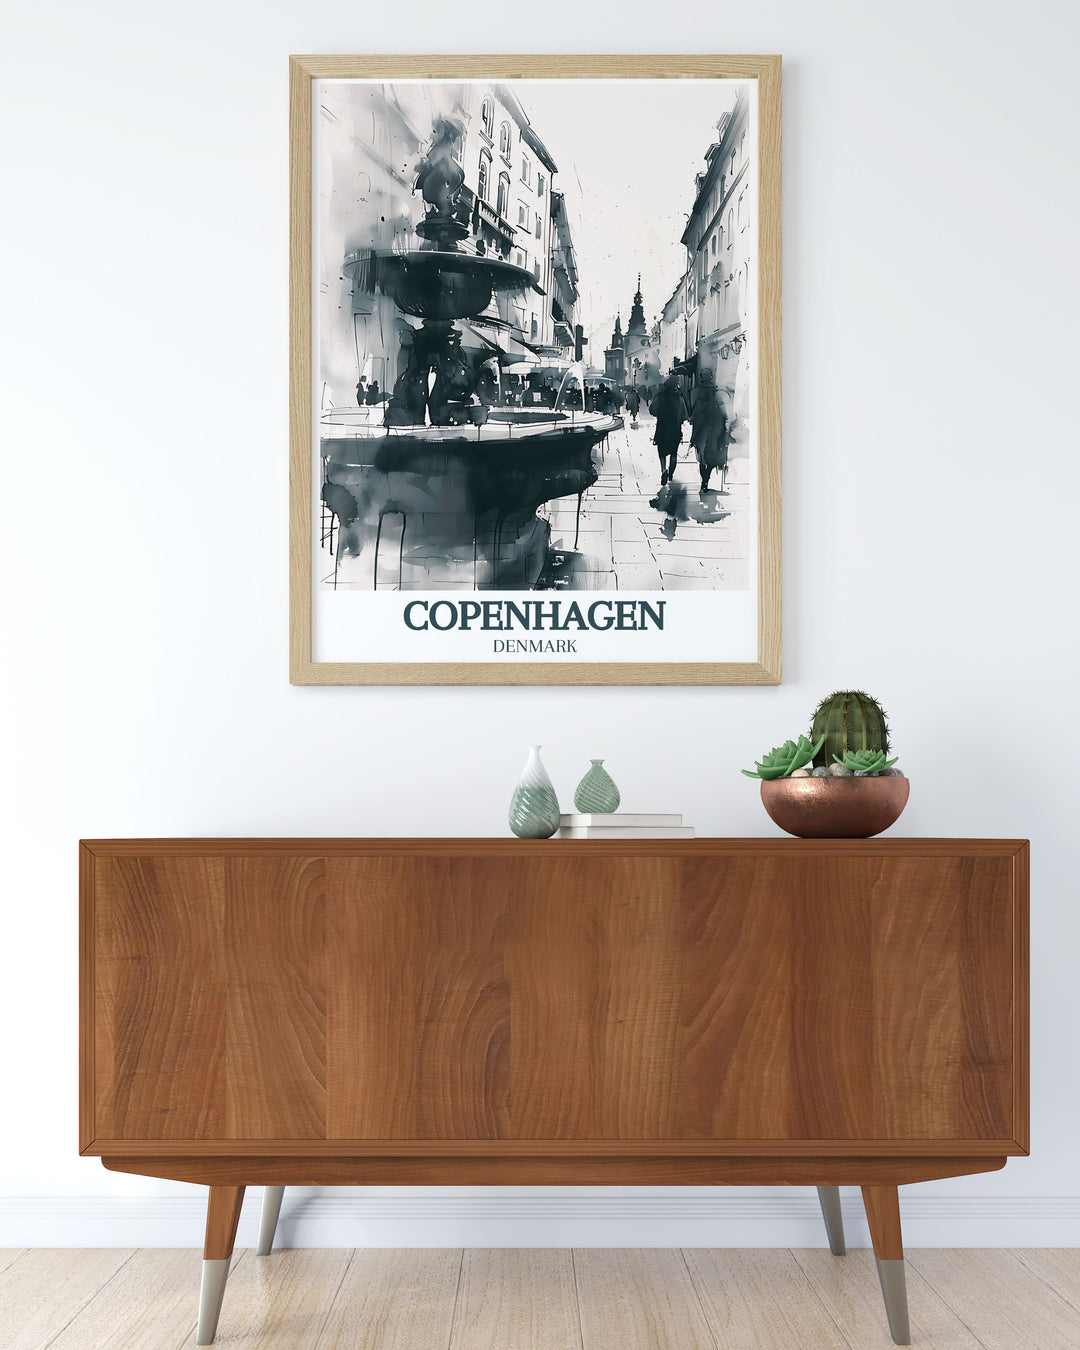 This vintage print of Stroget street, Stork Fountain from Copenhagen is a timeless piece of wall art. Perfect for adding a historic and charming touch to your space. Ideal for anyone who appreciates classic travel posters and European destinations.